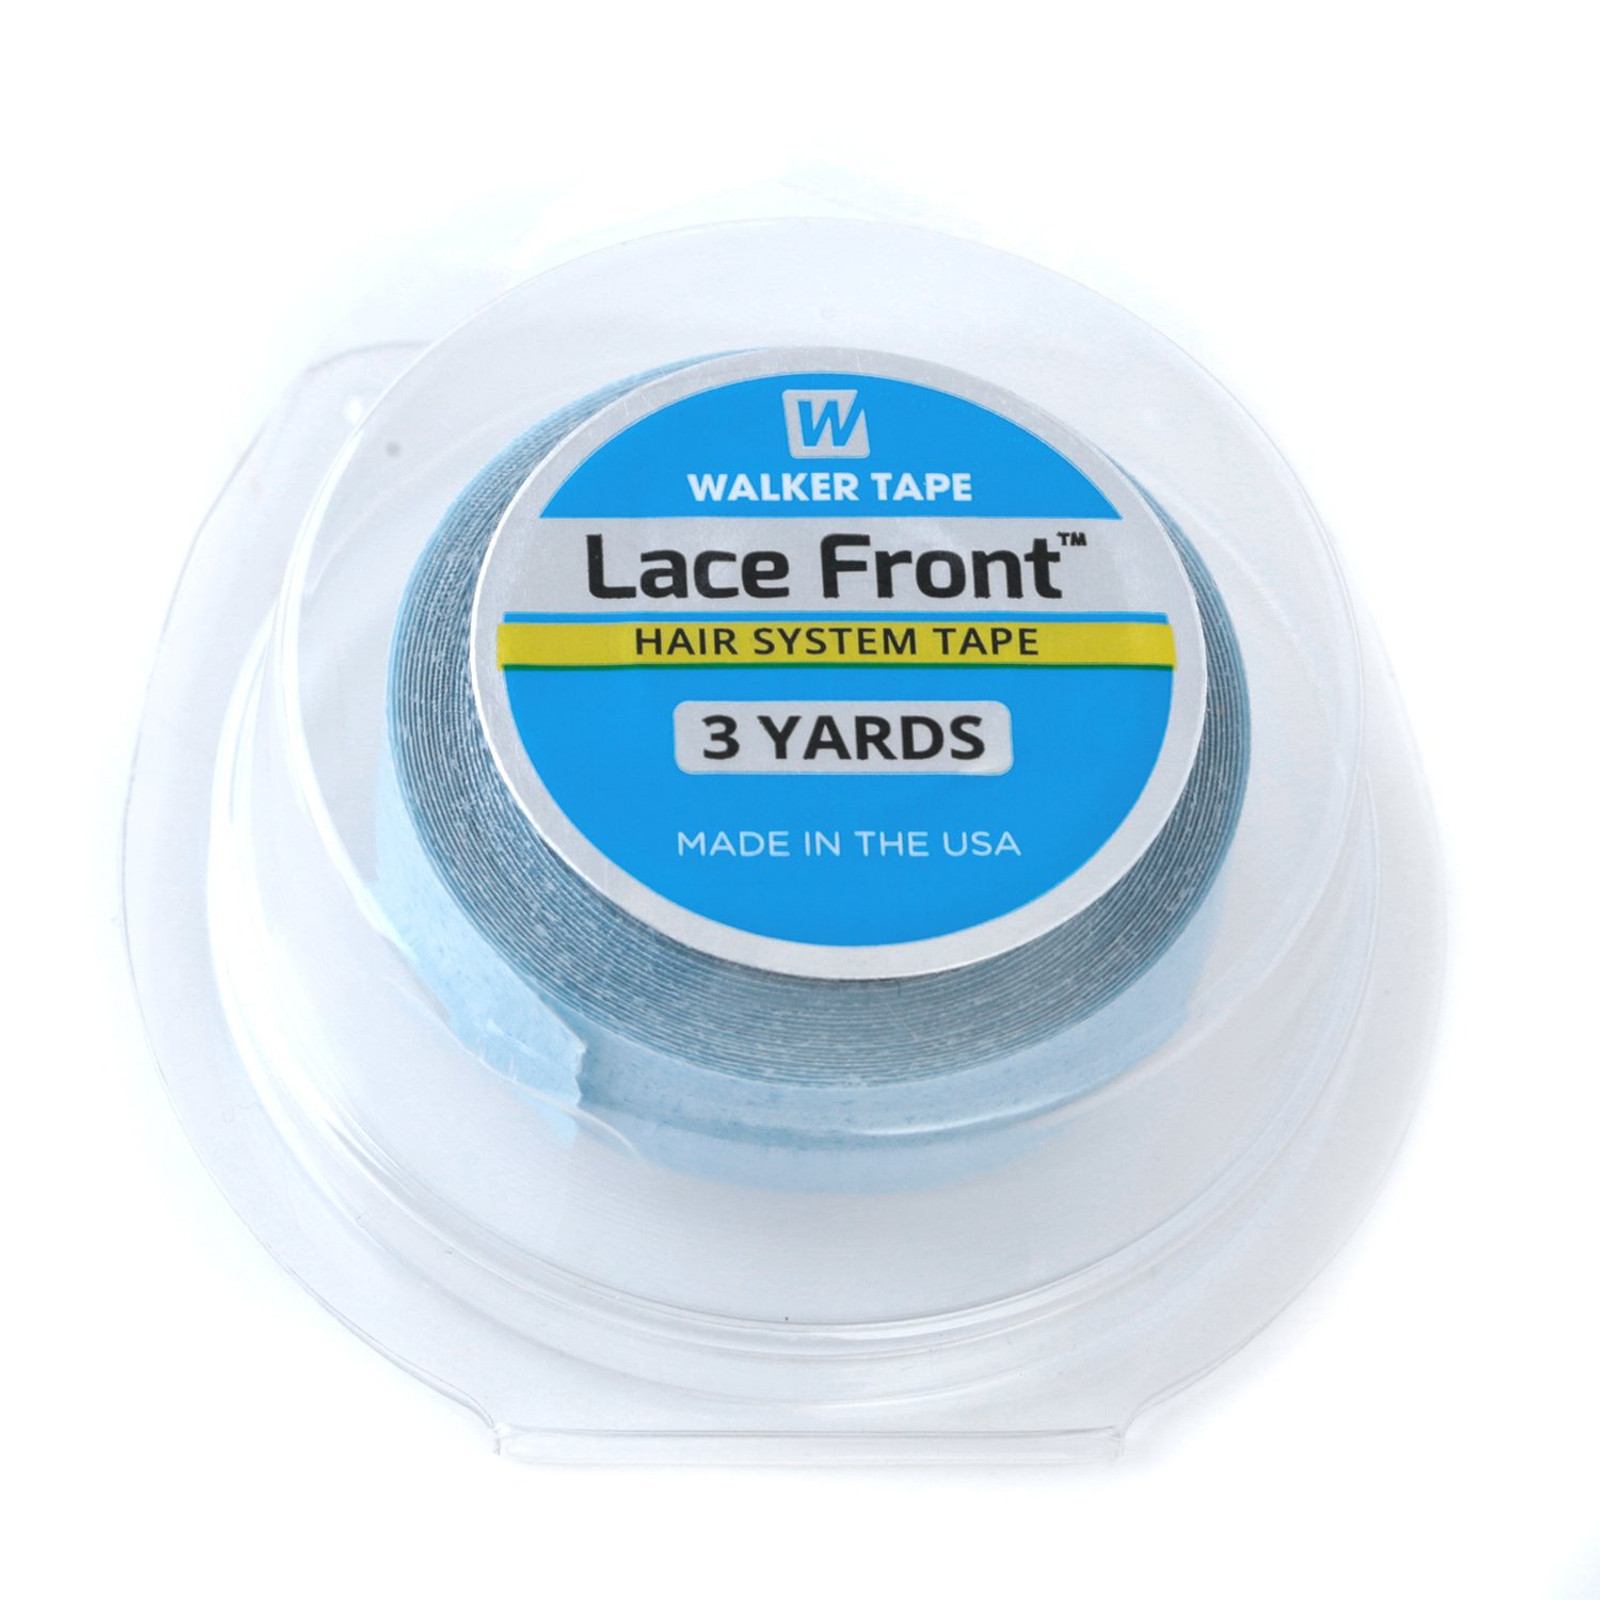 Walker Tape Lace Front Support Tape Rolls (1/2inch x 3Yard)